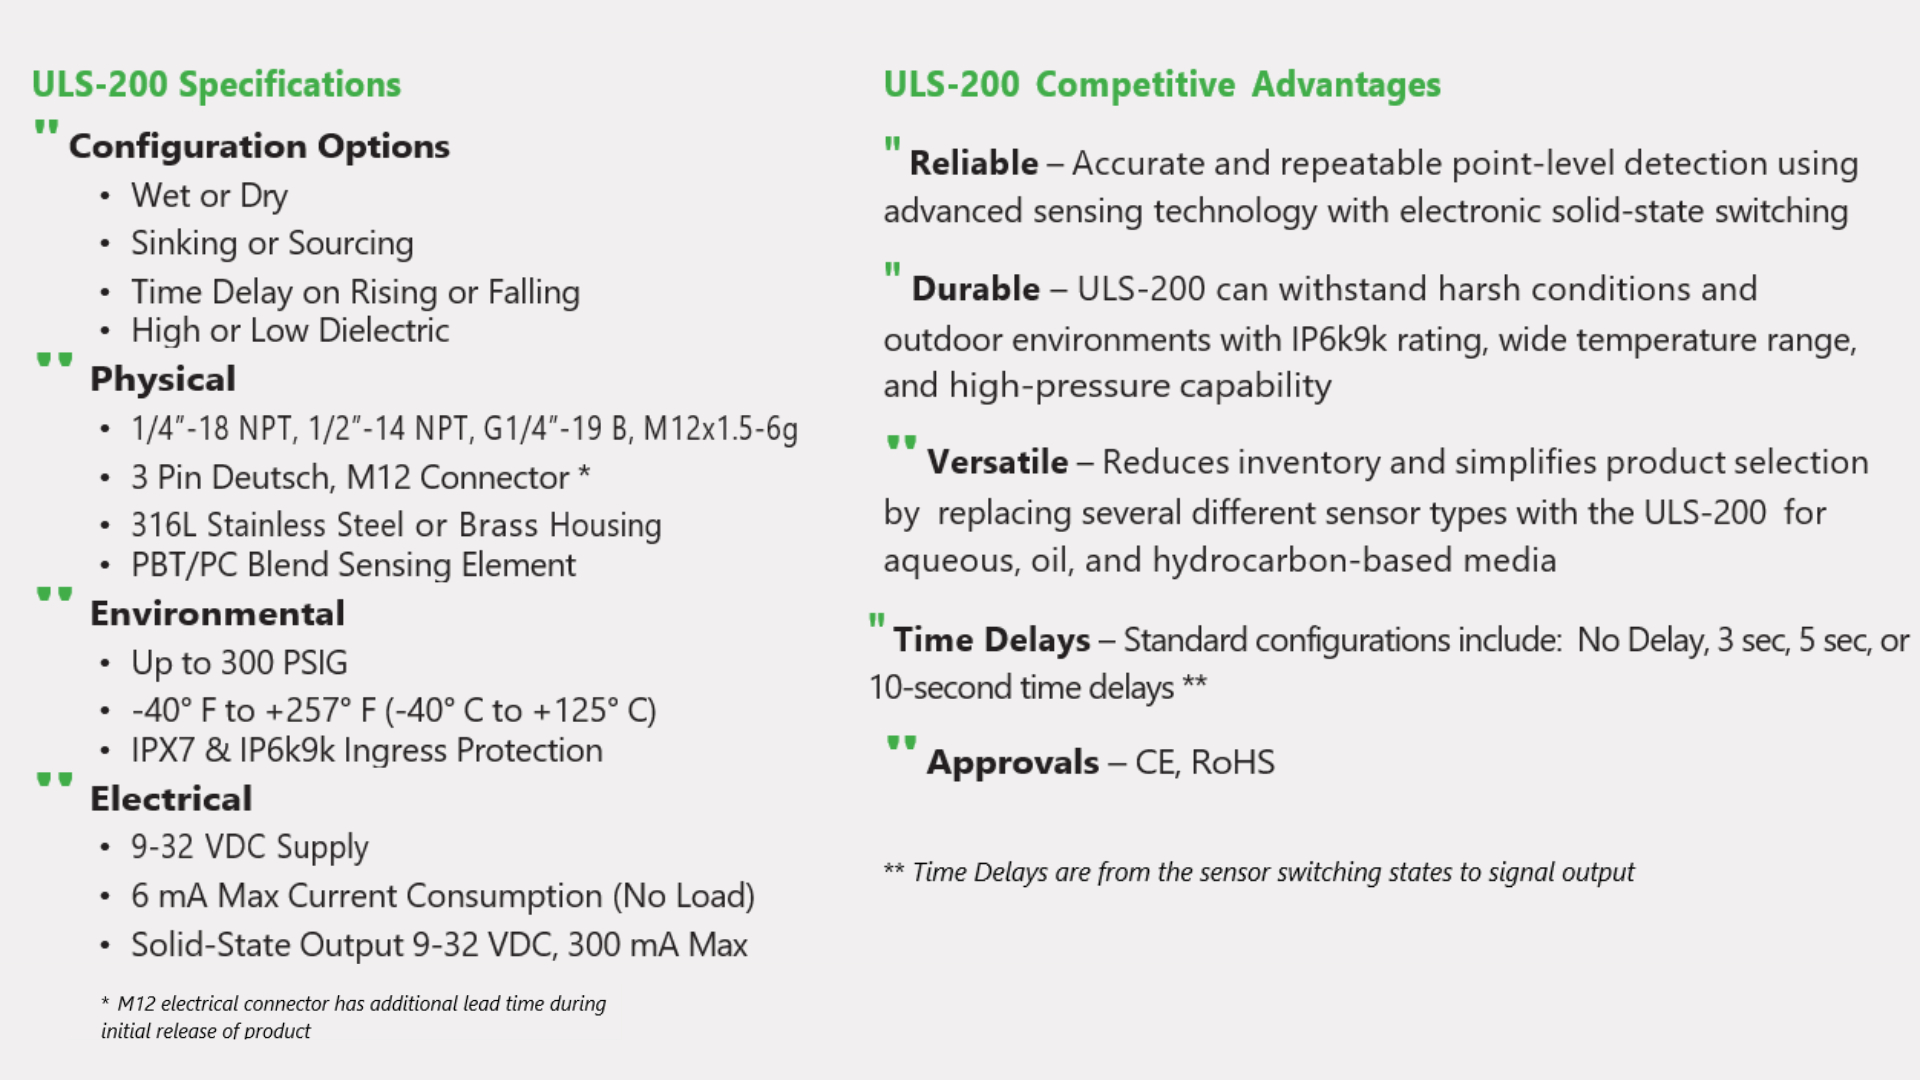 ULS-200 specifications